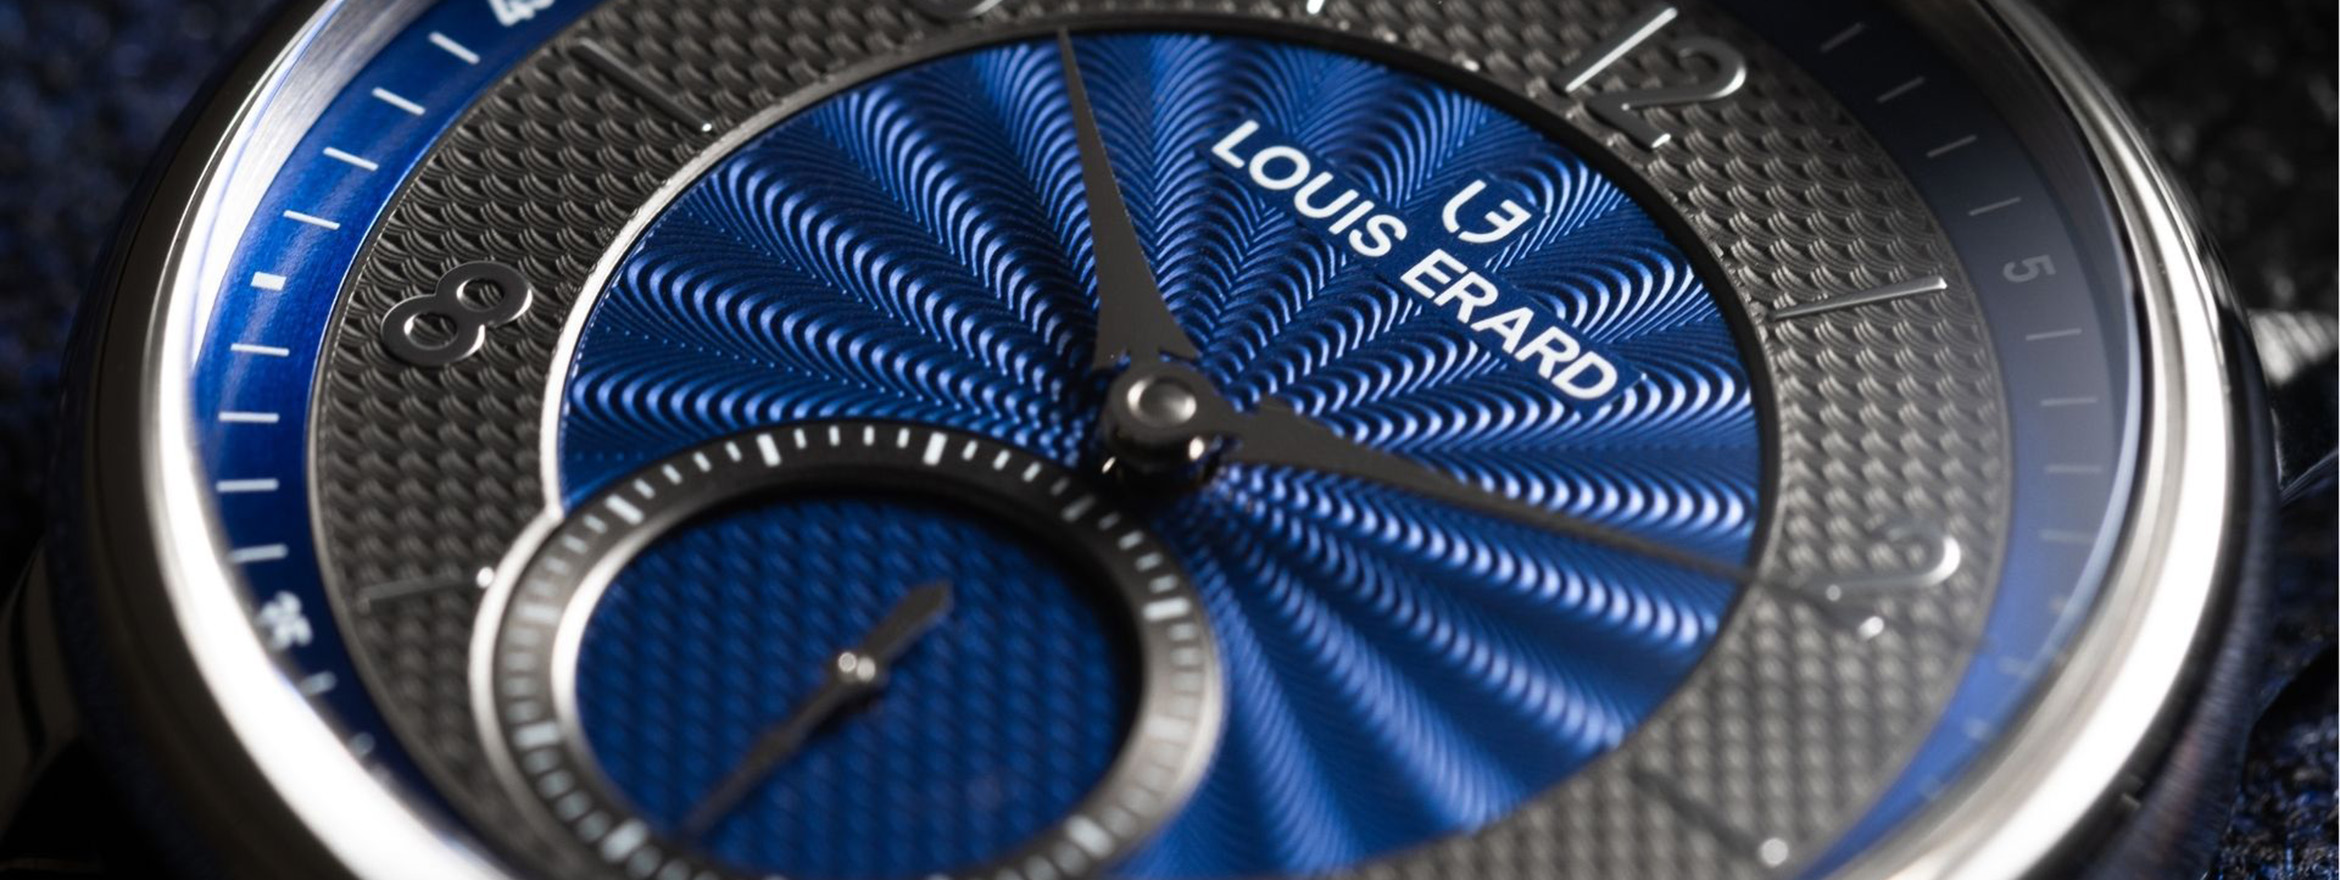 The Excellence Petite Seconde Guilloché is Louis Erard’s ode to high watchmaking